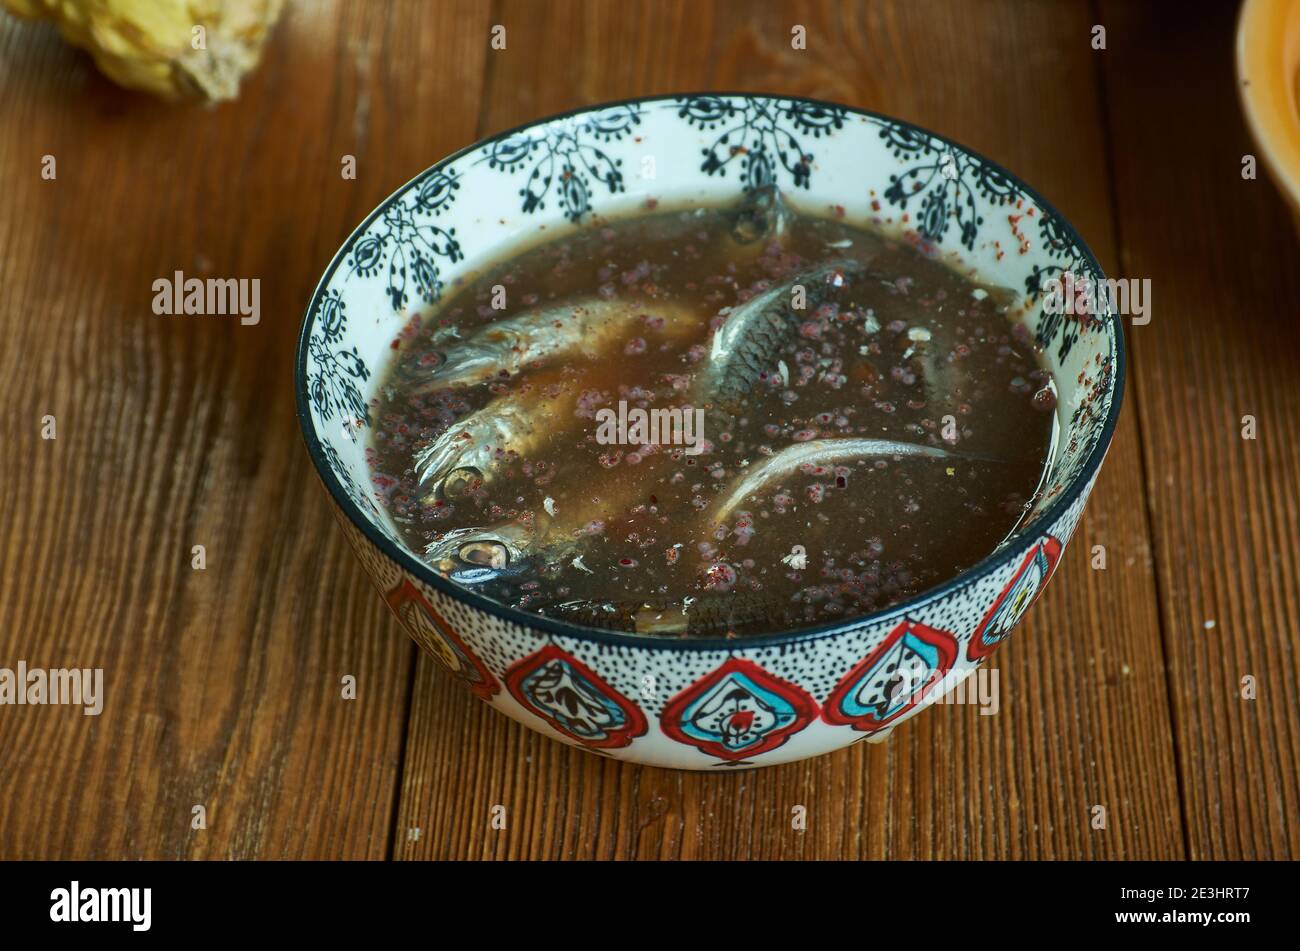 Garum - ancient fermented fish sauce dating back to Roman times Stock Photo  - Alamy